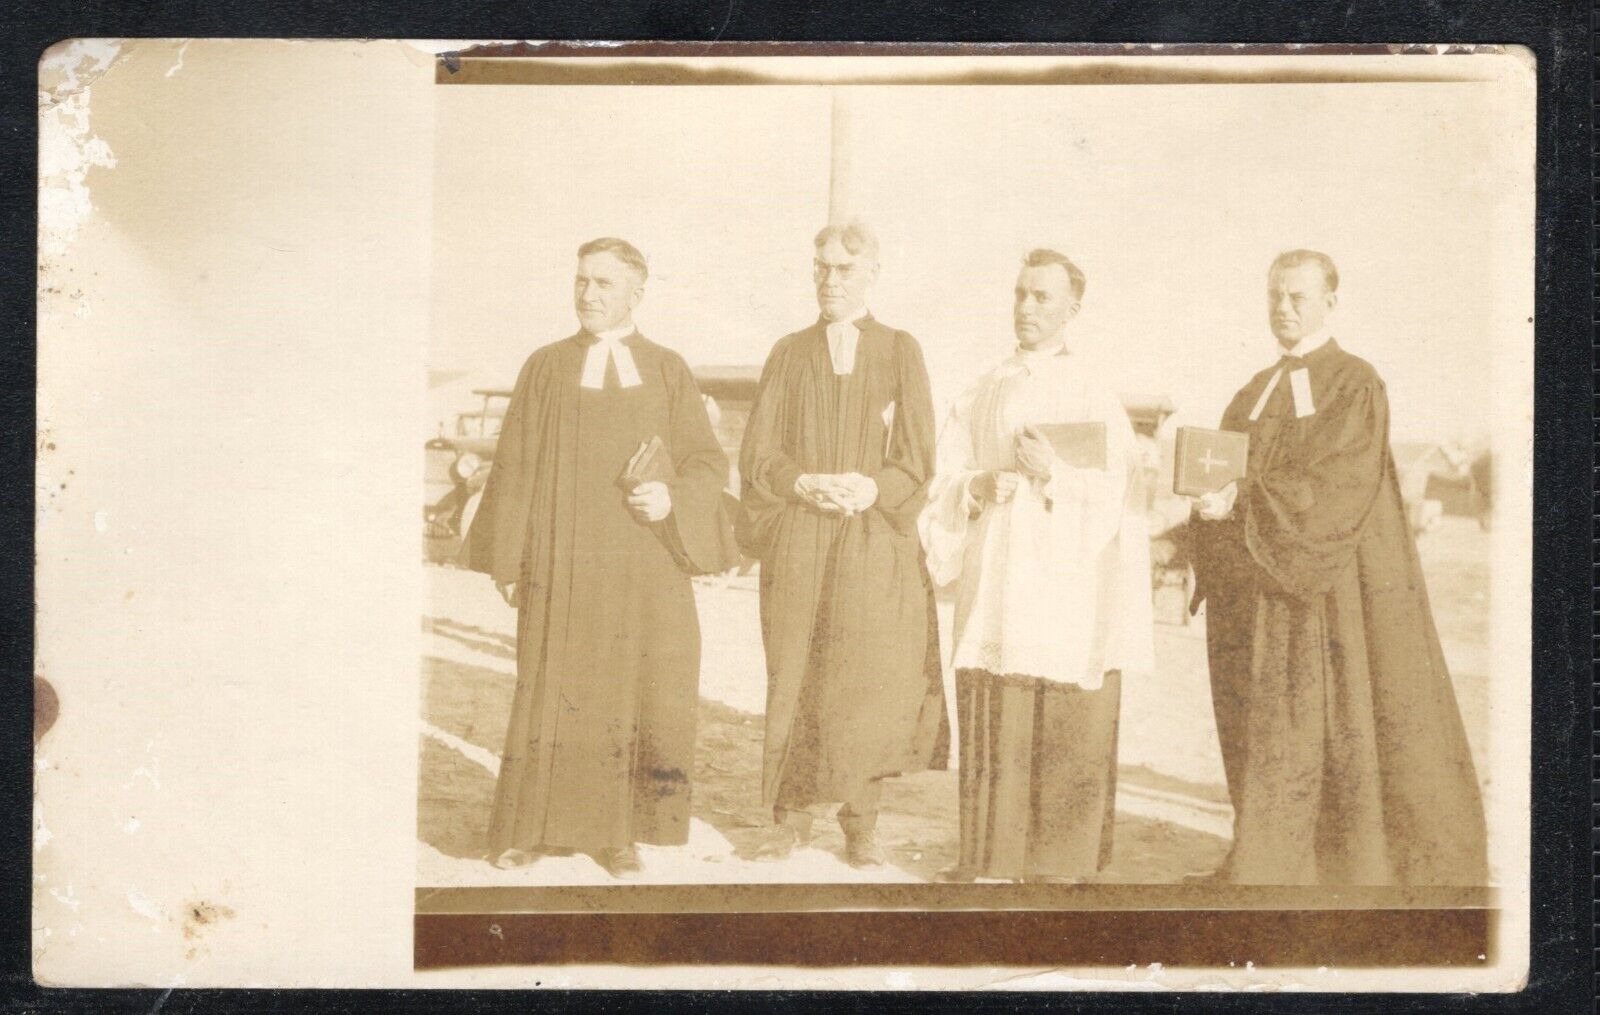 RPPC of Four Priest - Divided back likely 1920s